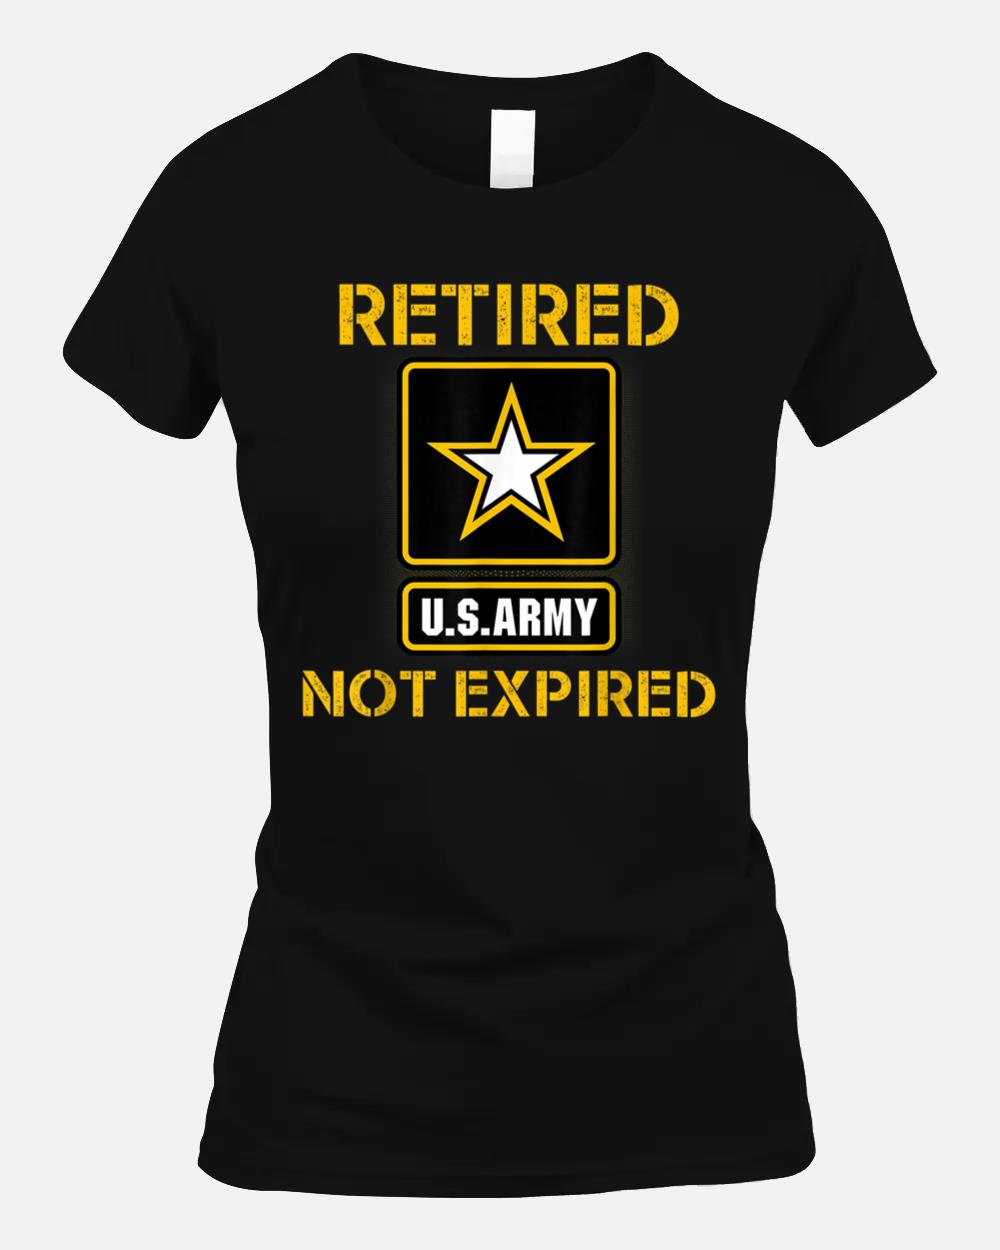 Retired - Not Expired - Army Military - Vintage Style Unisex T-Shirt